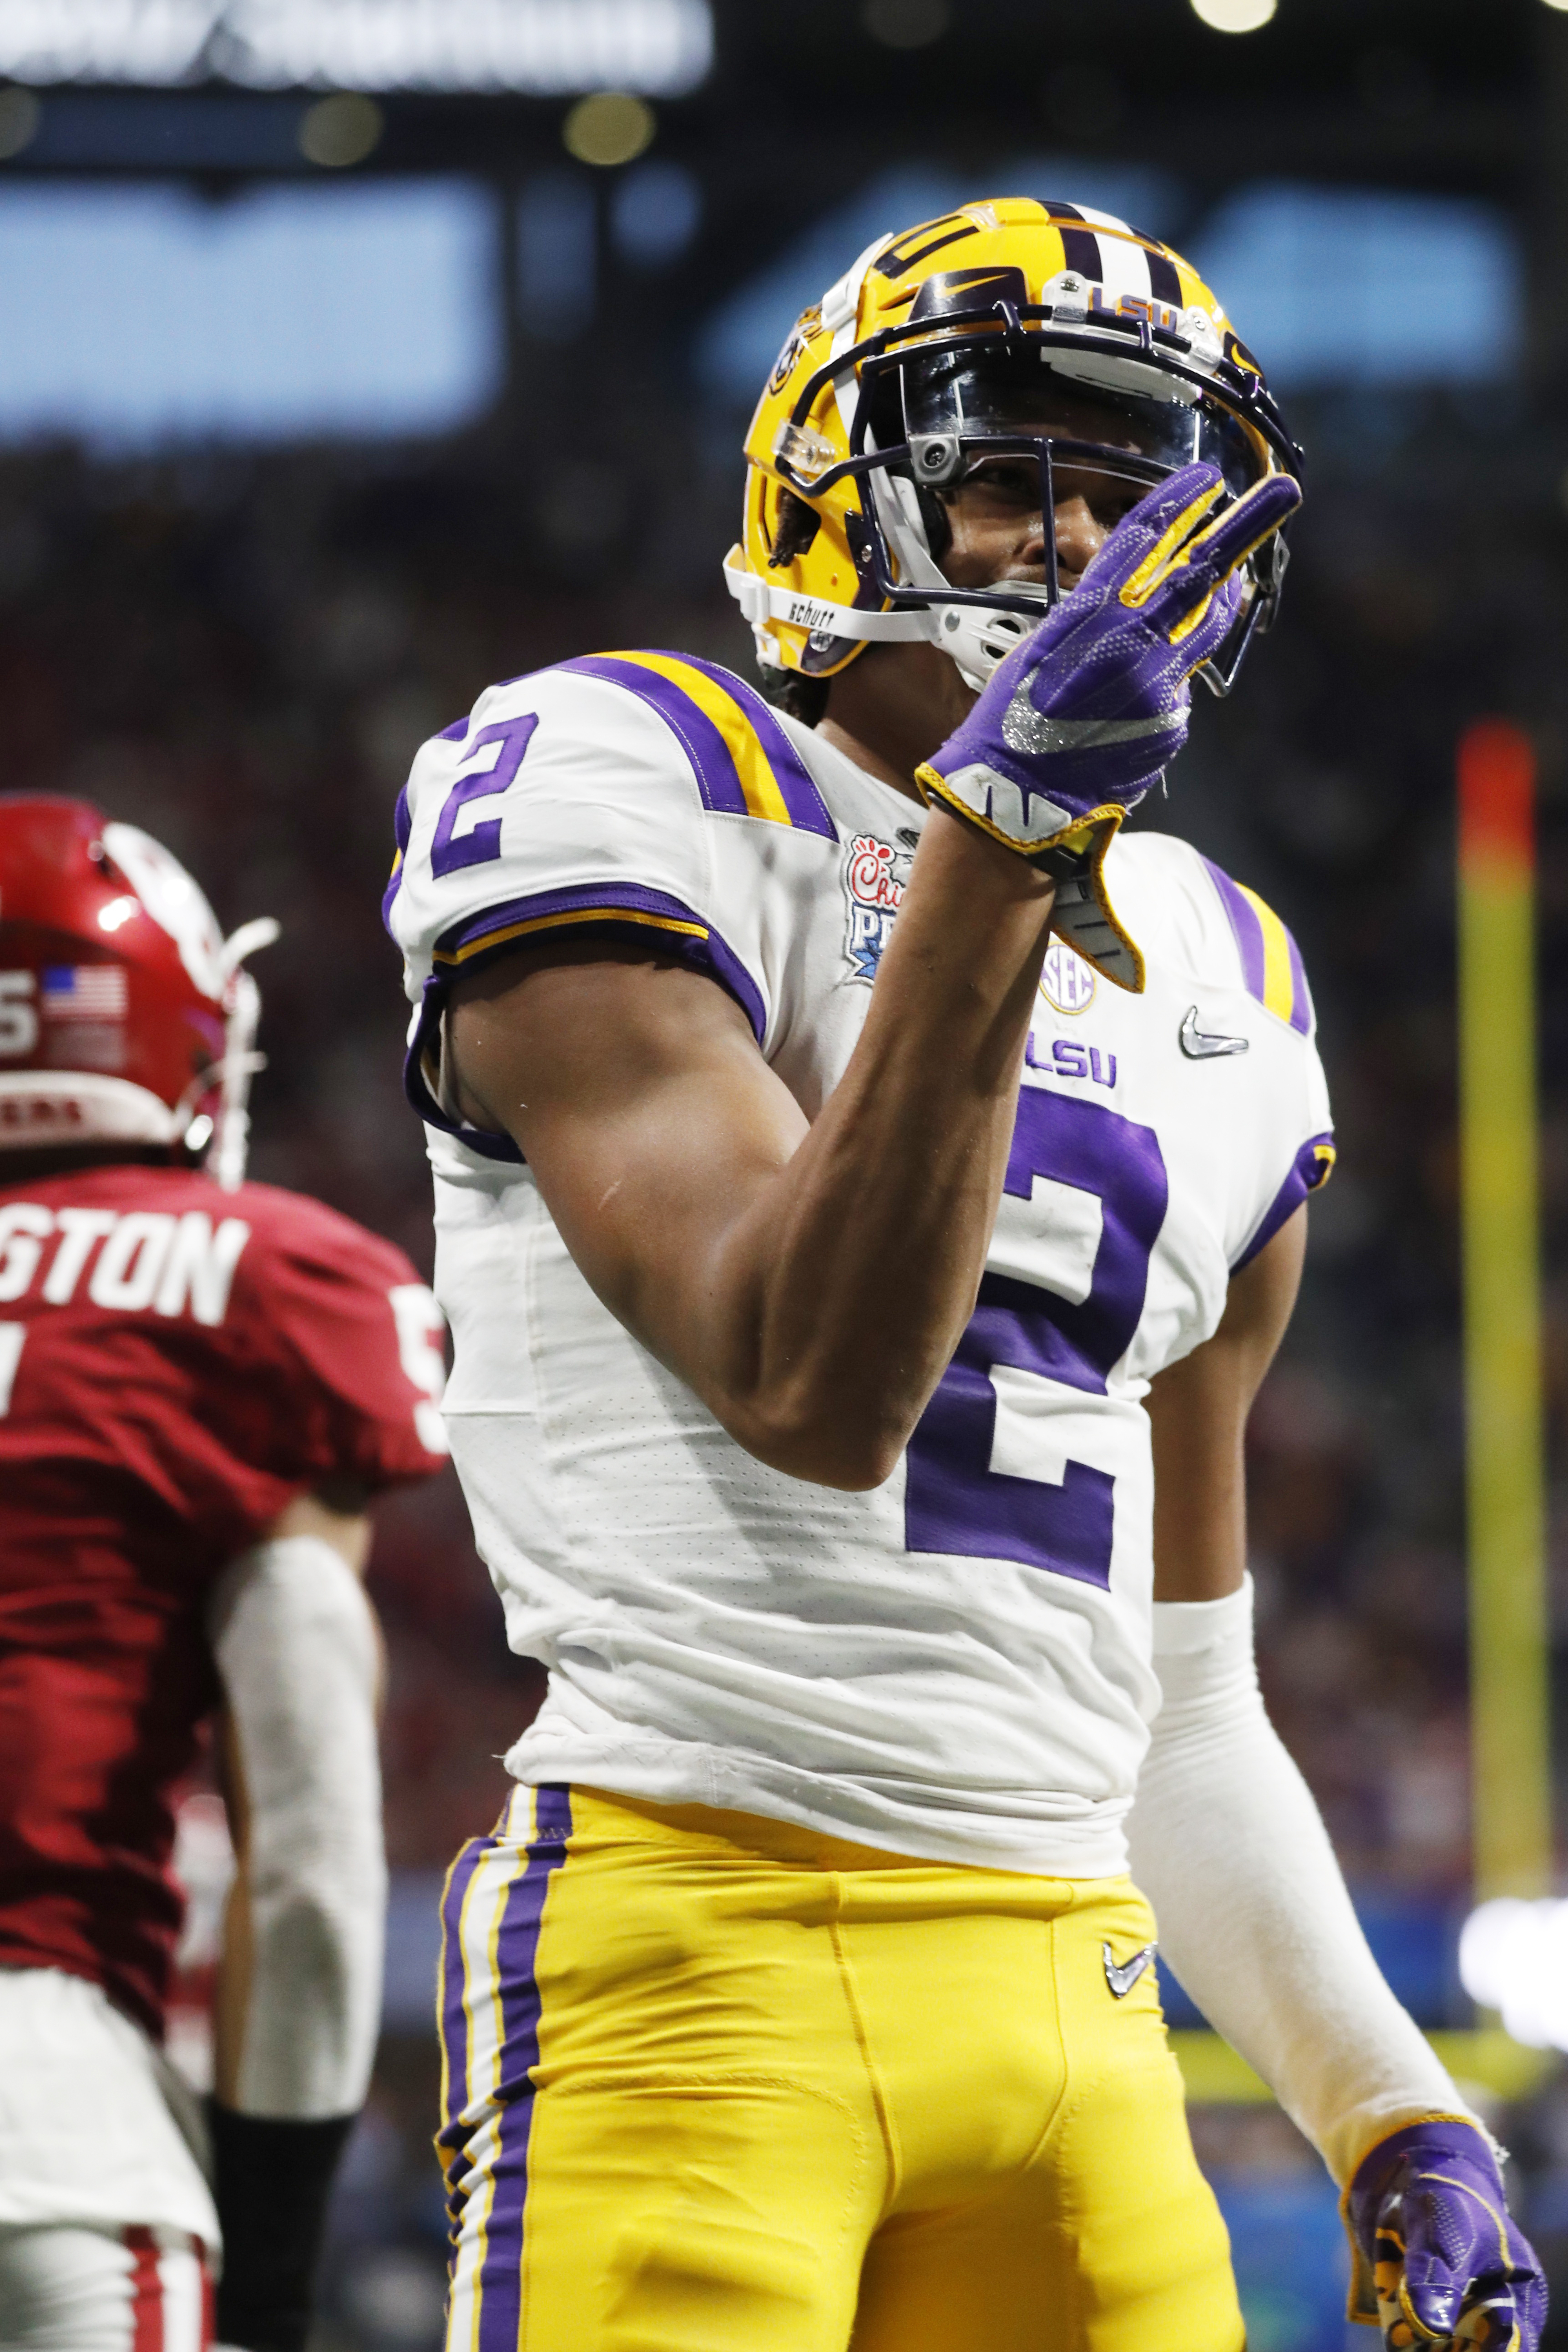 No. 1 LSU's Burrow's 7 TD passes ties record for bowl game